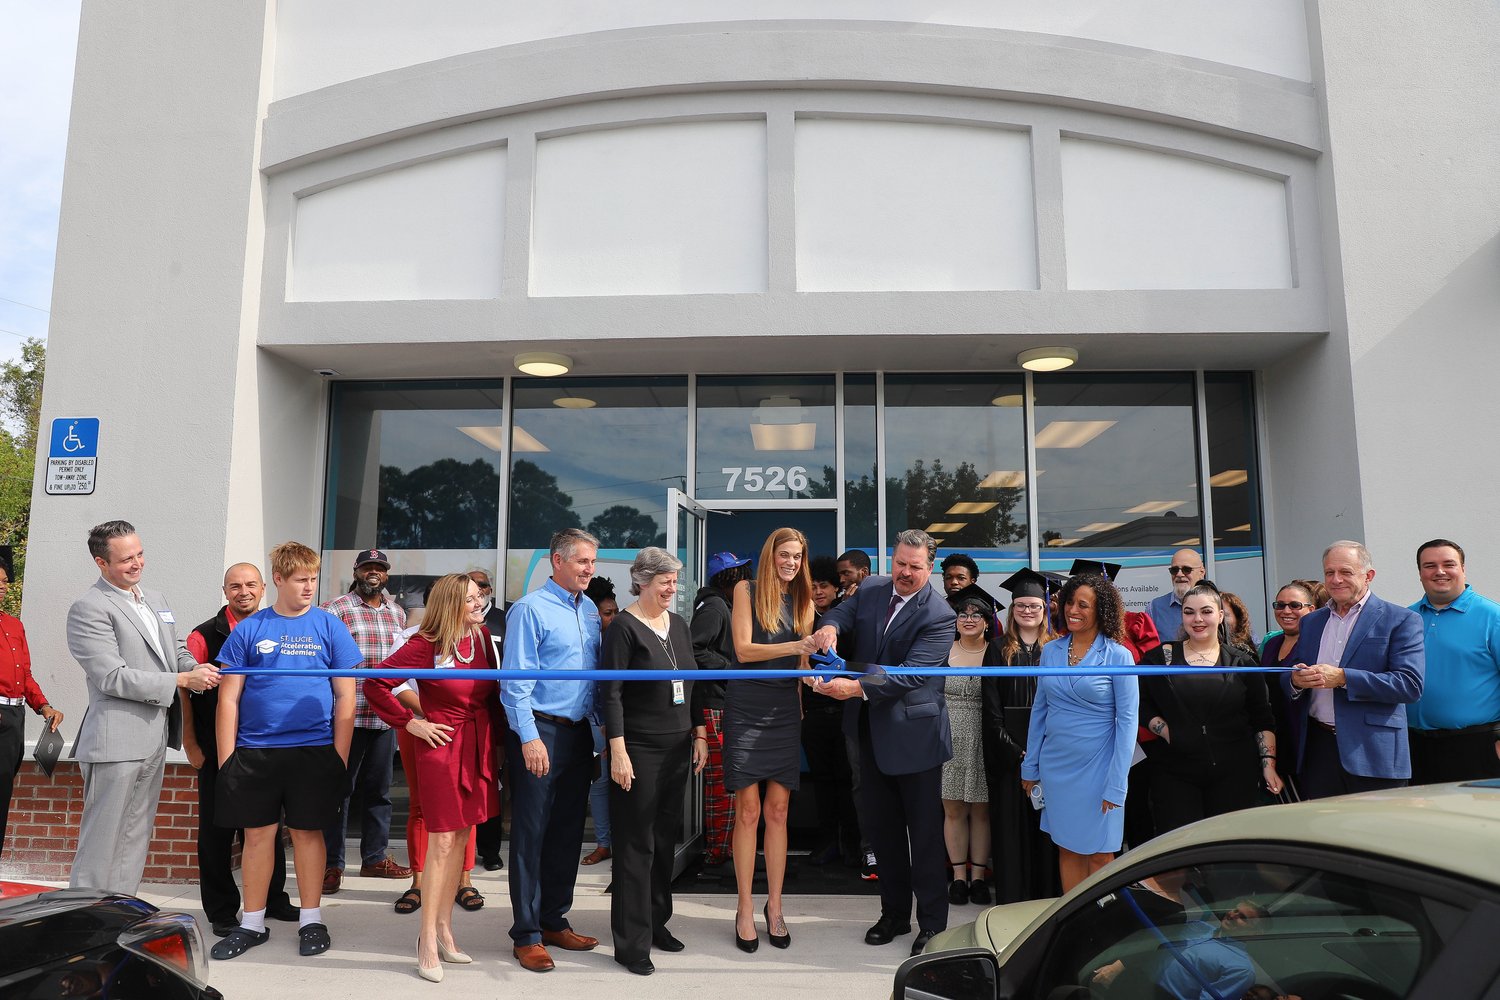 TV News Crews Cover Grand Opening of New St. Lucie Campus Hero Image